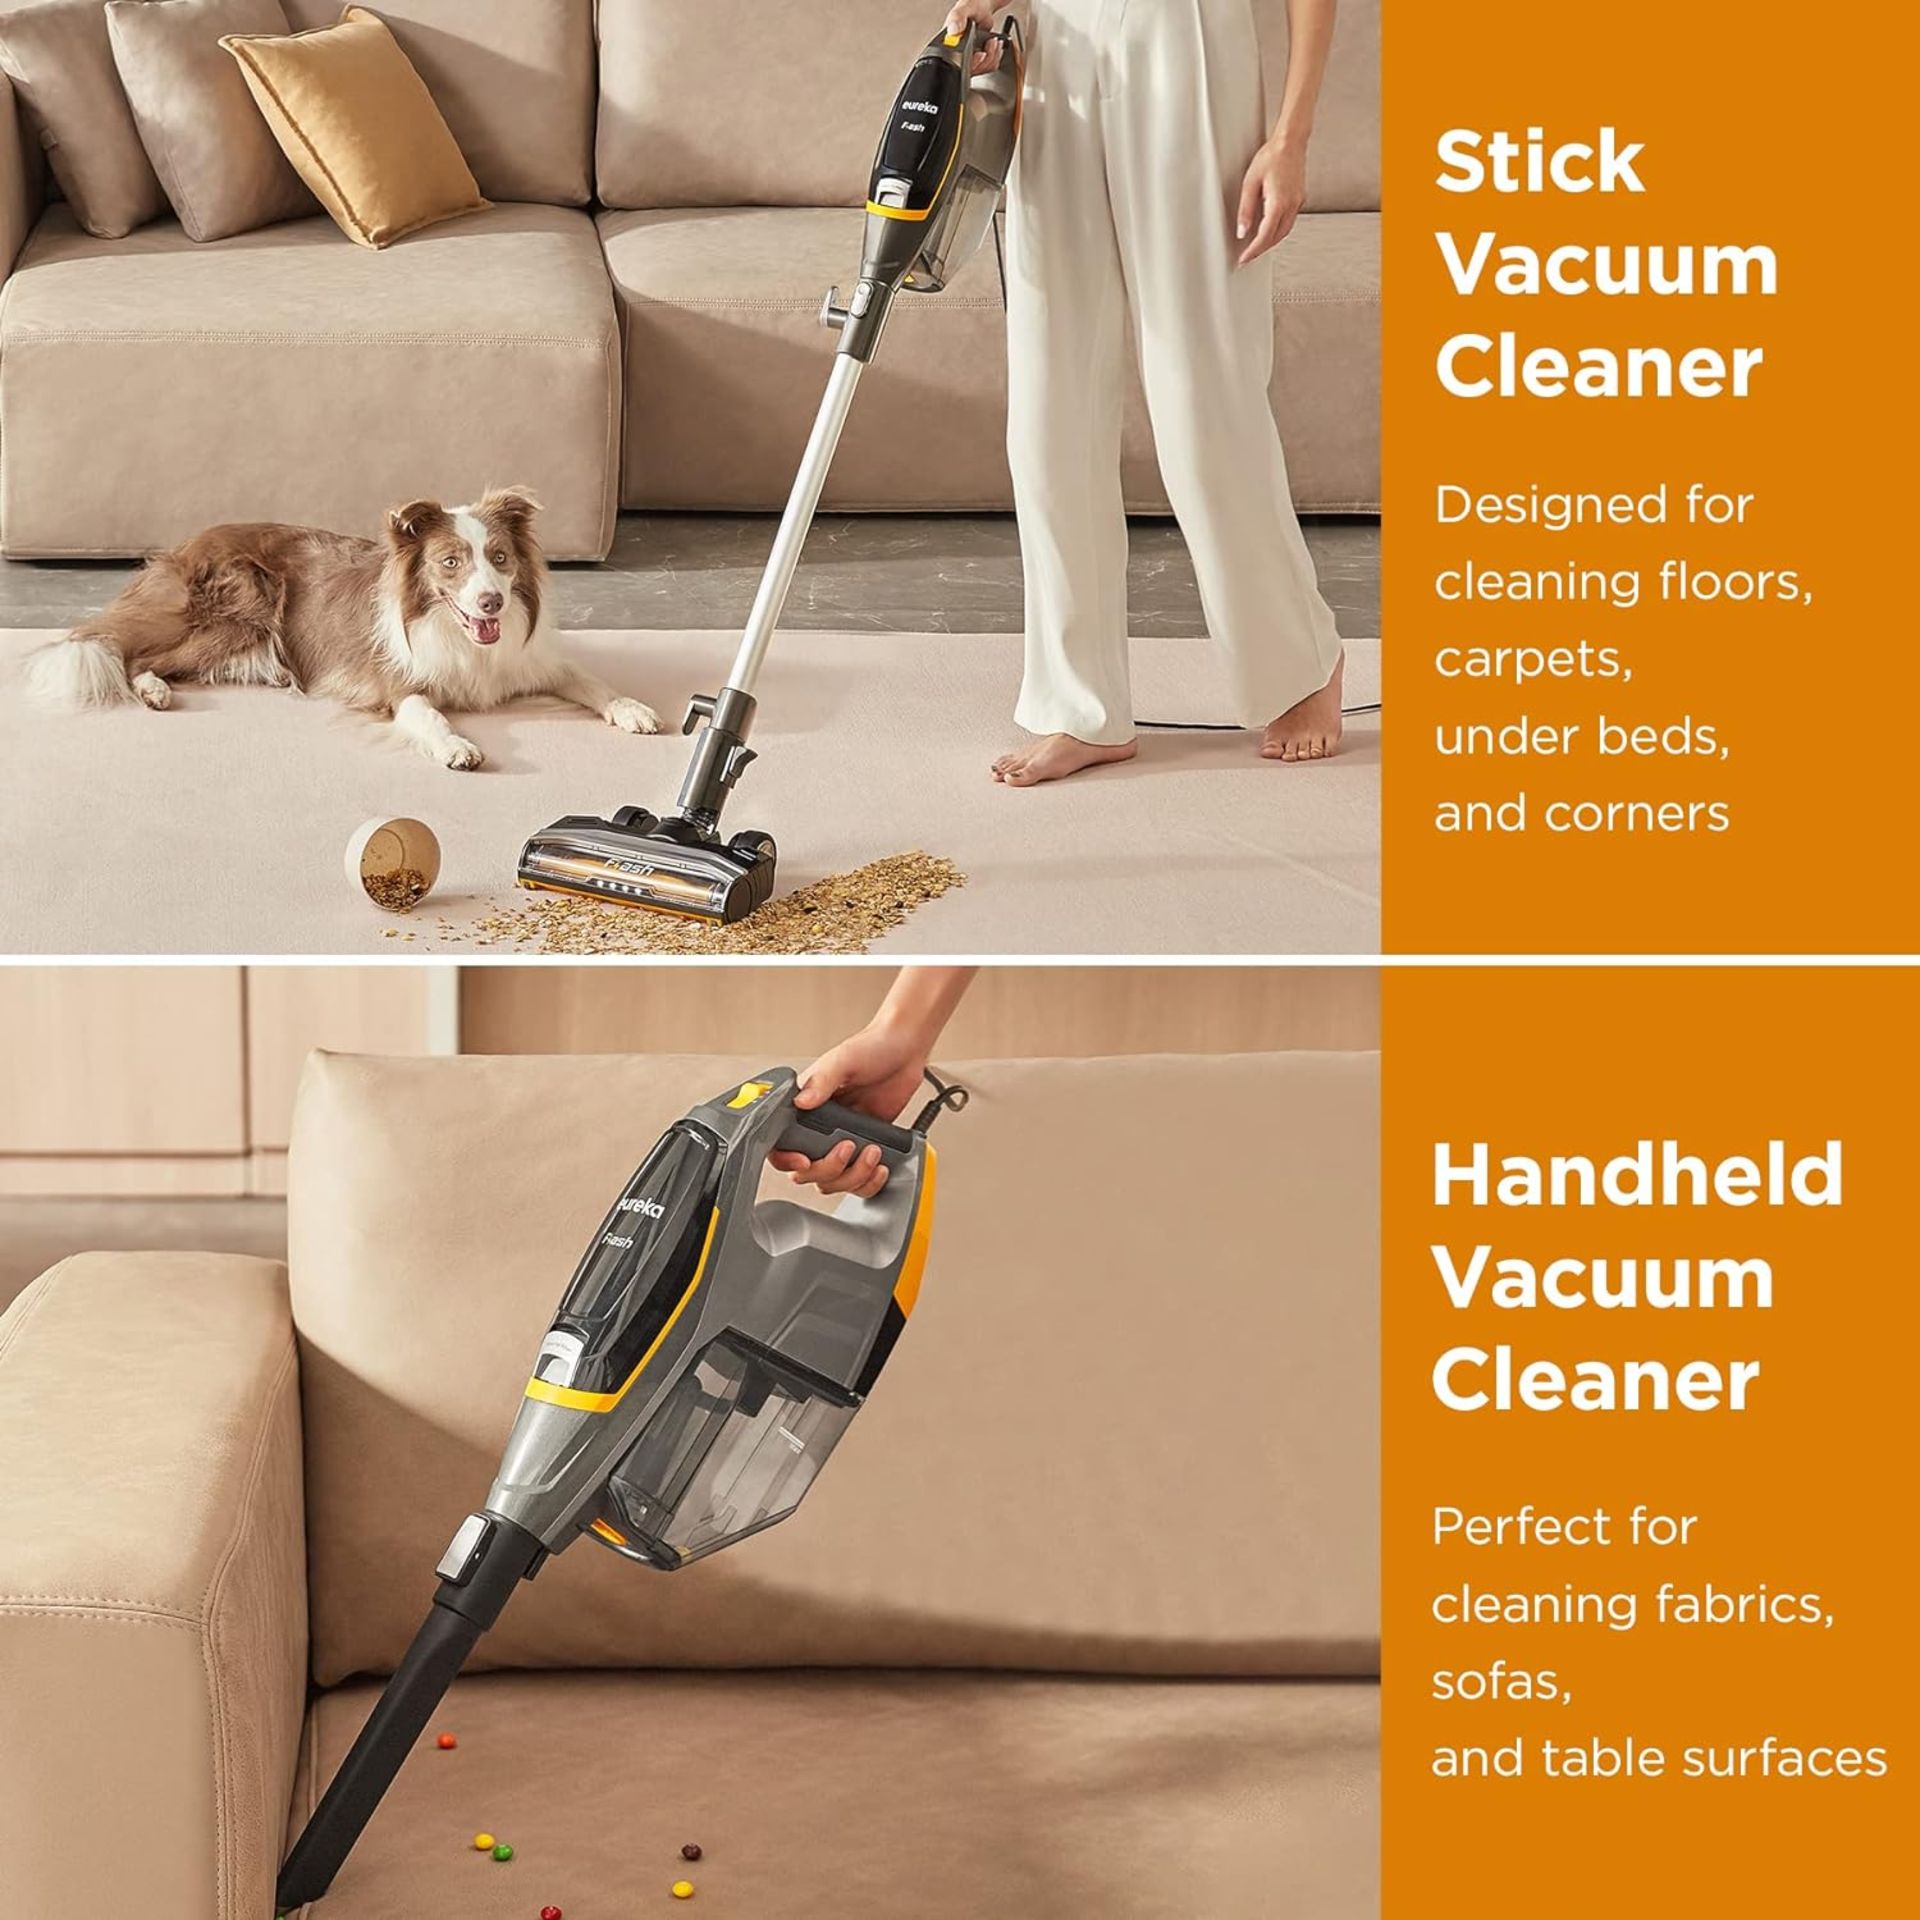 Brand New Eureka NES510 2-in-1 Corded Stick & Handheld Vacuum Cleaner, 400W Motor for Whole House, - Image 2 of 7